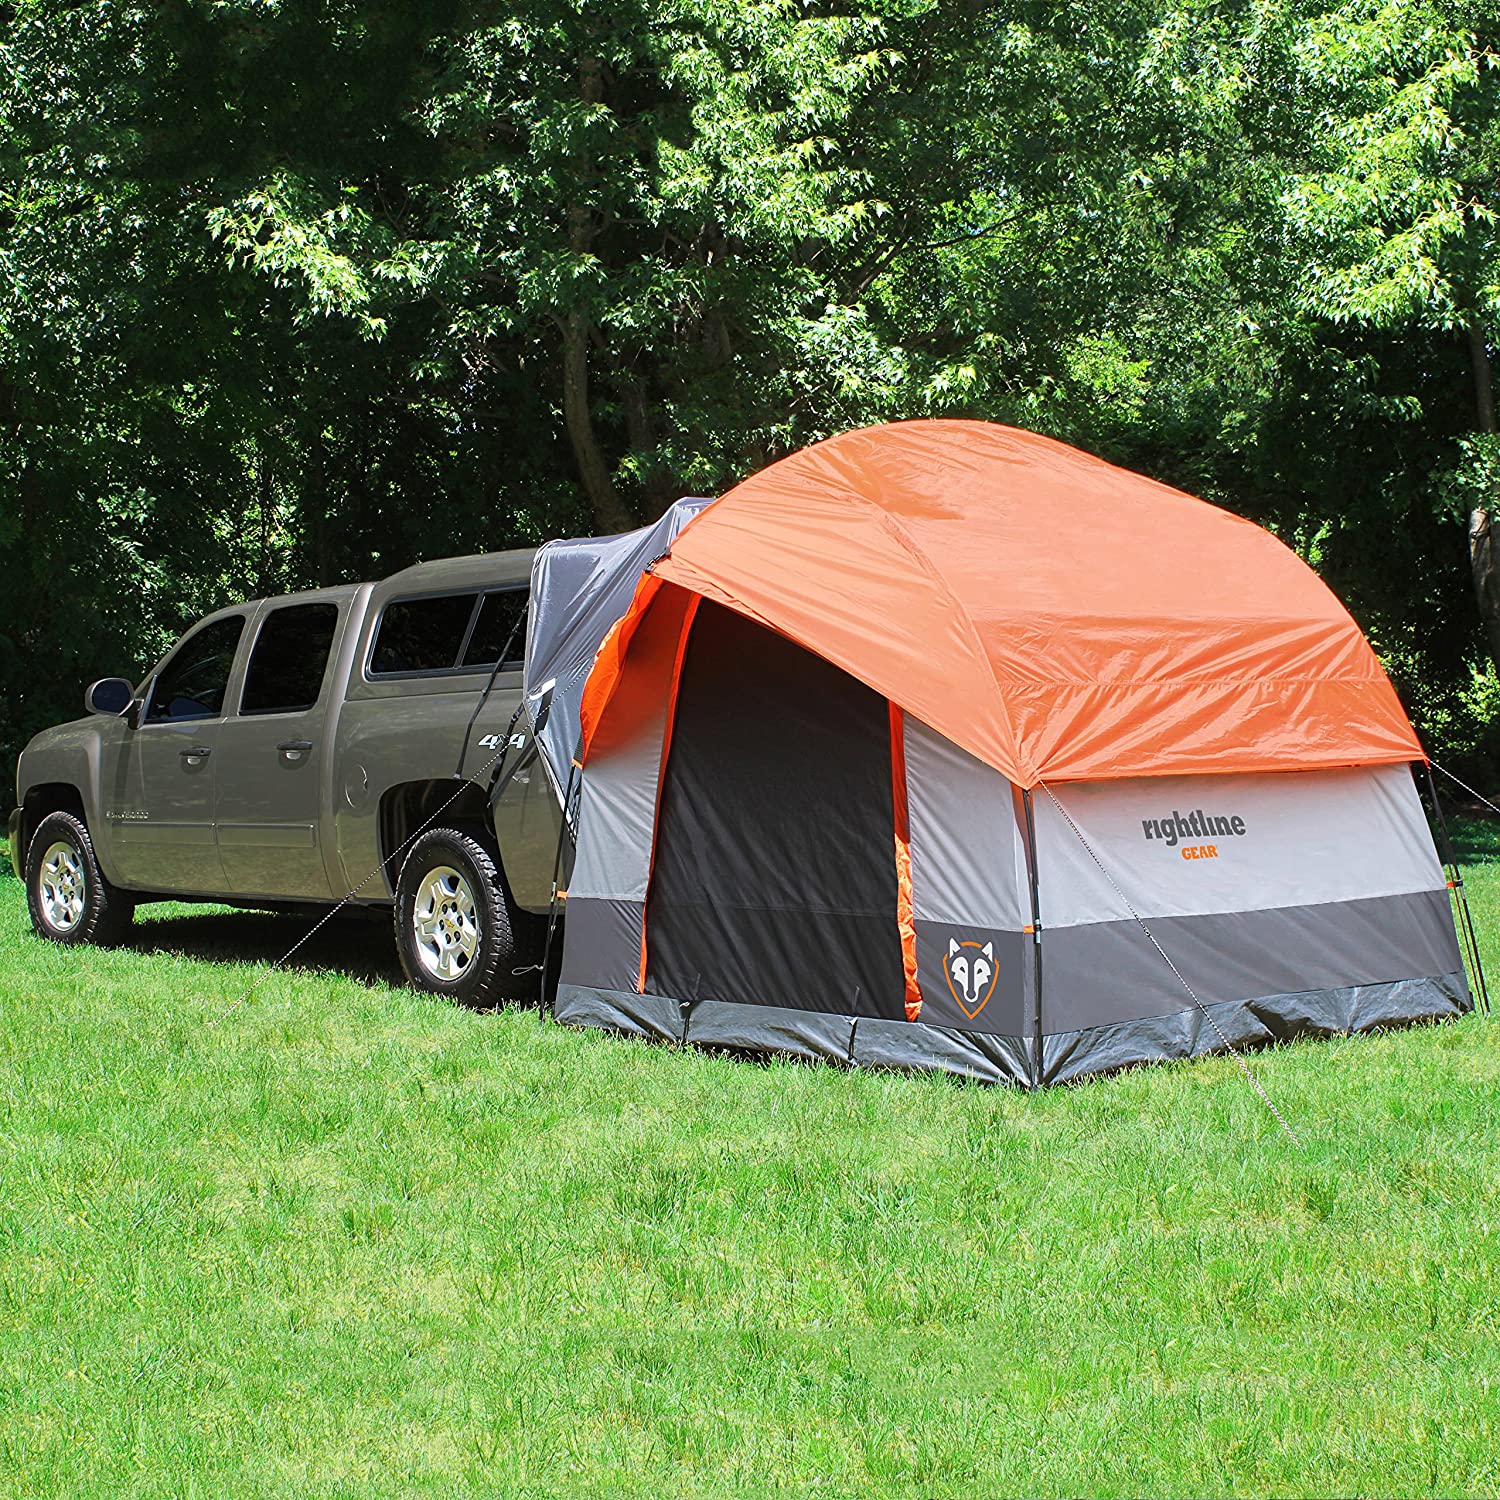 The Best SUV Tents For Camping